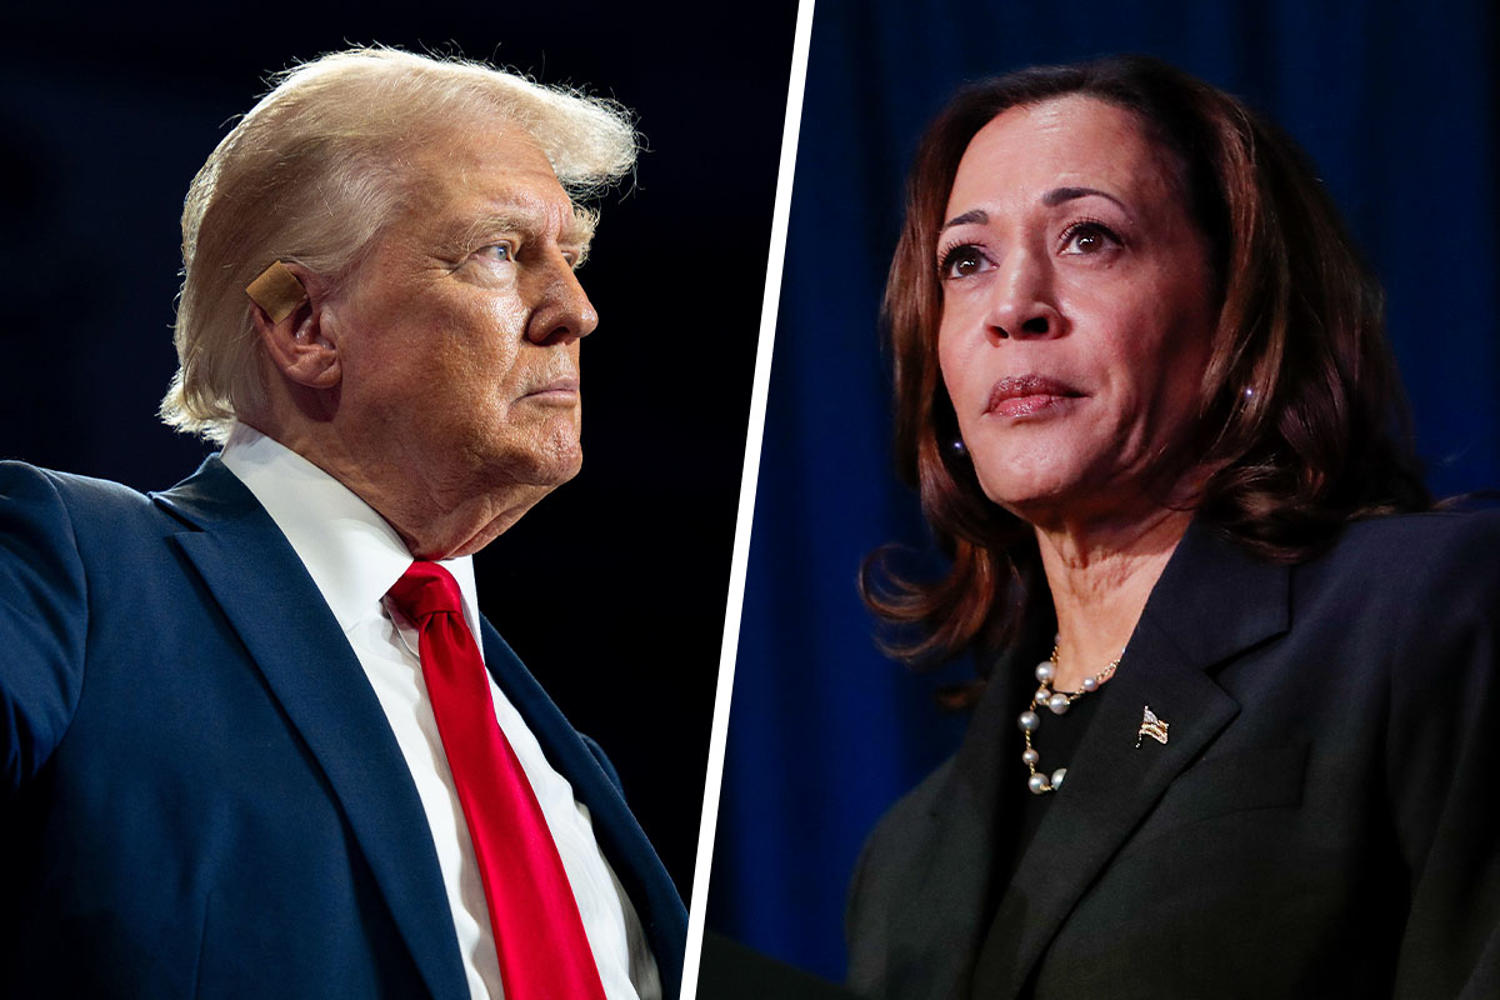 Trump says Harris shouldn’t be ‘allowed to run,’ recycling weird claim